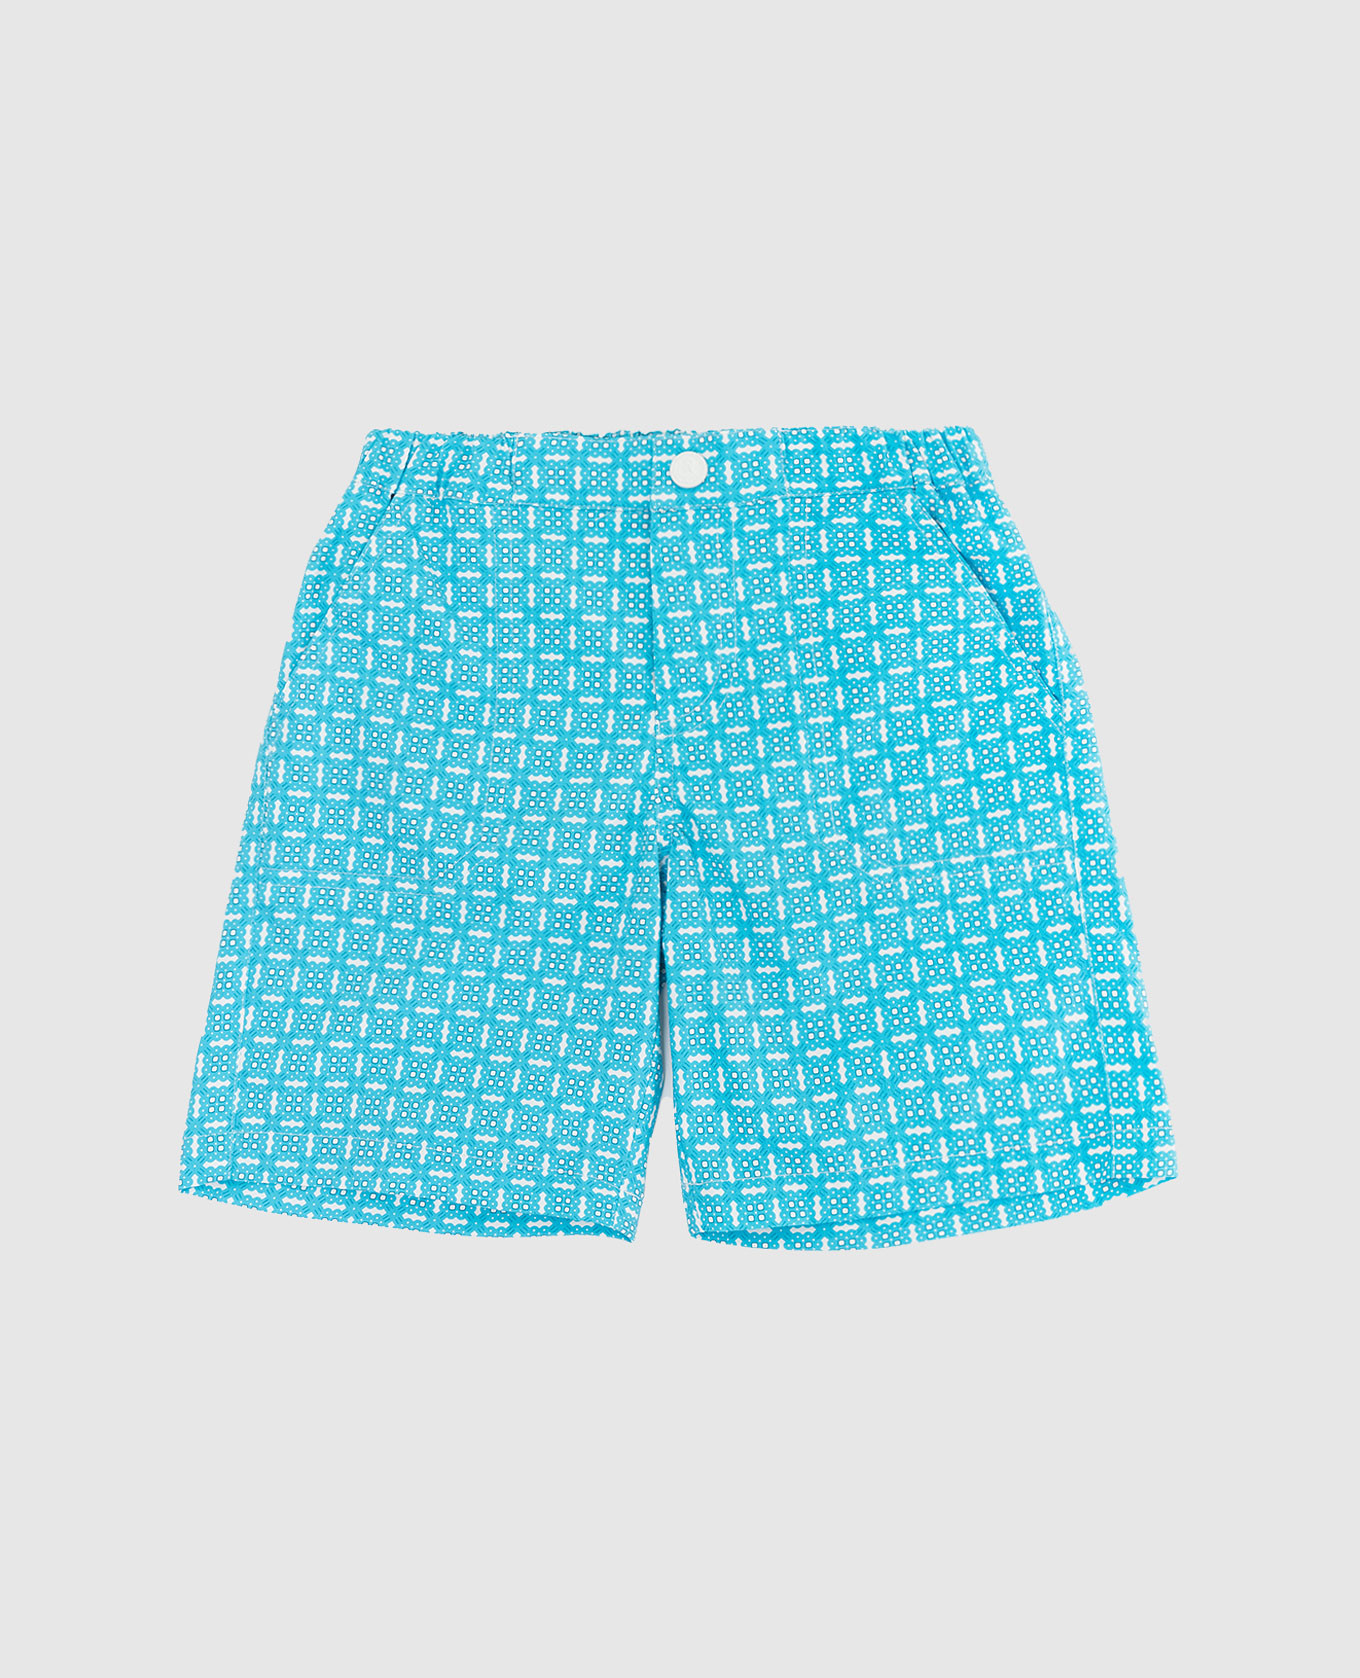 Children's blue swimming shorts in a pattern